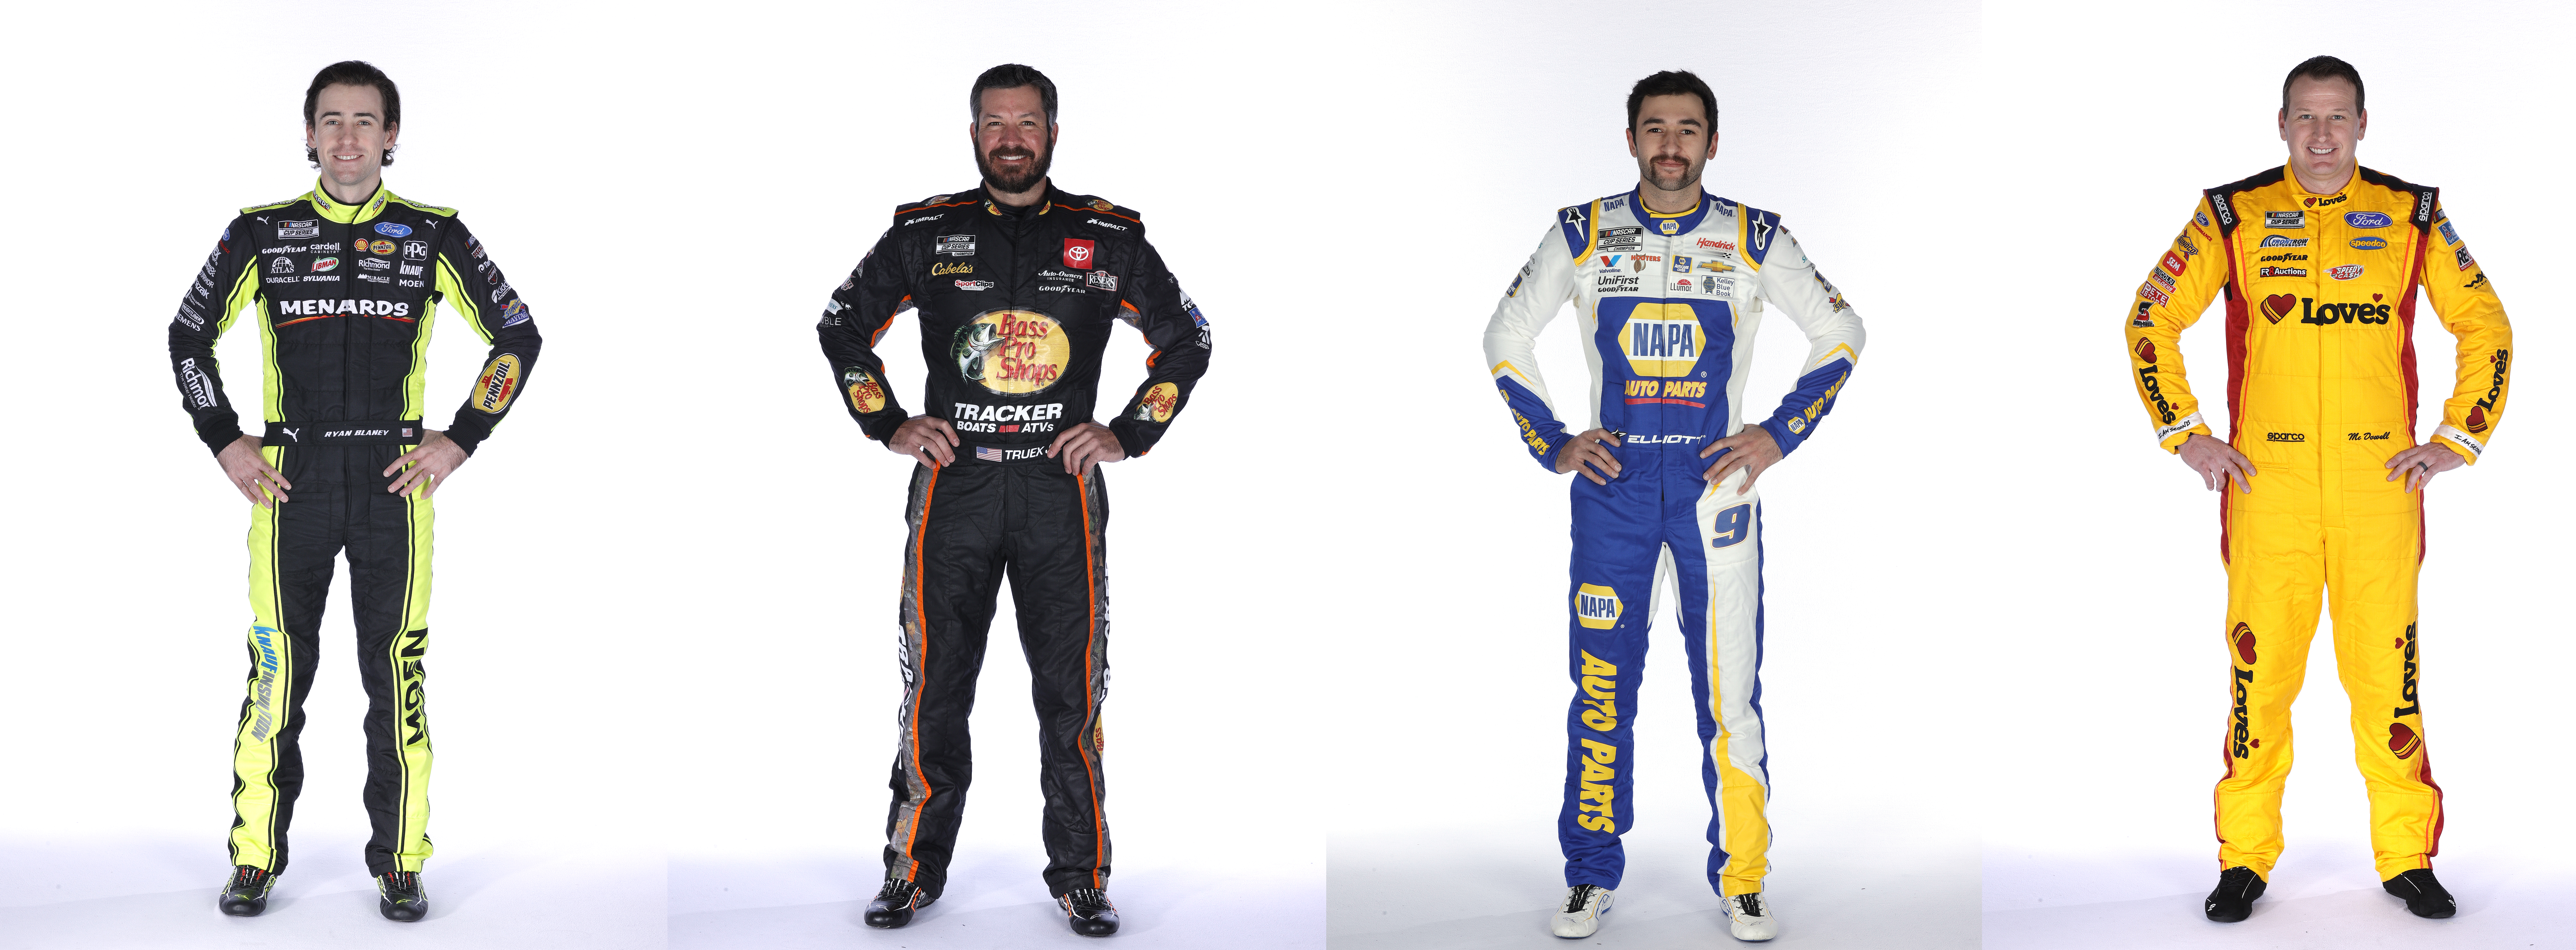 In this case, this quartet has the swagger for a Daytona win!